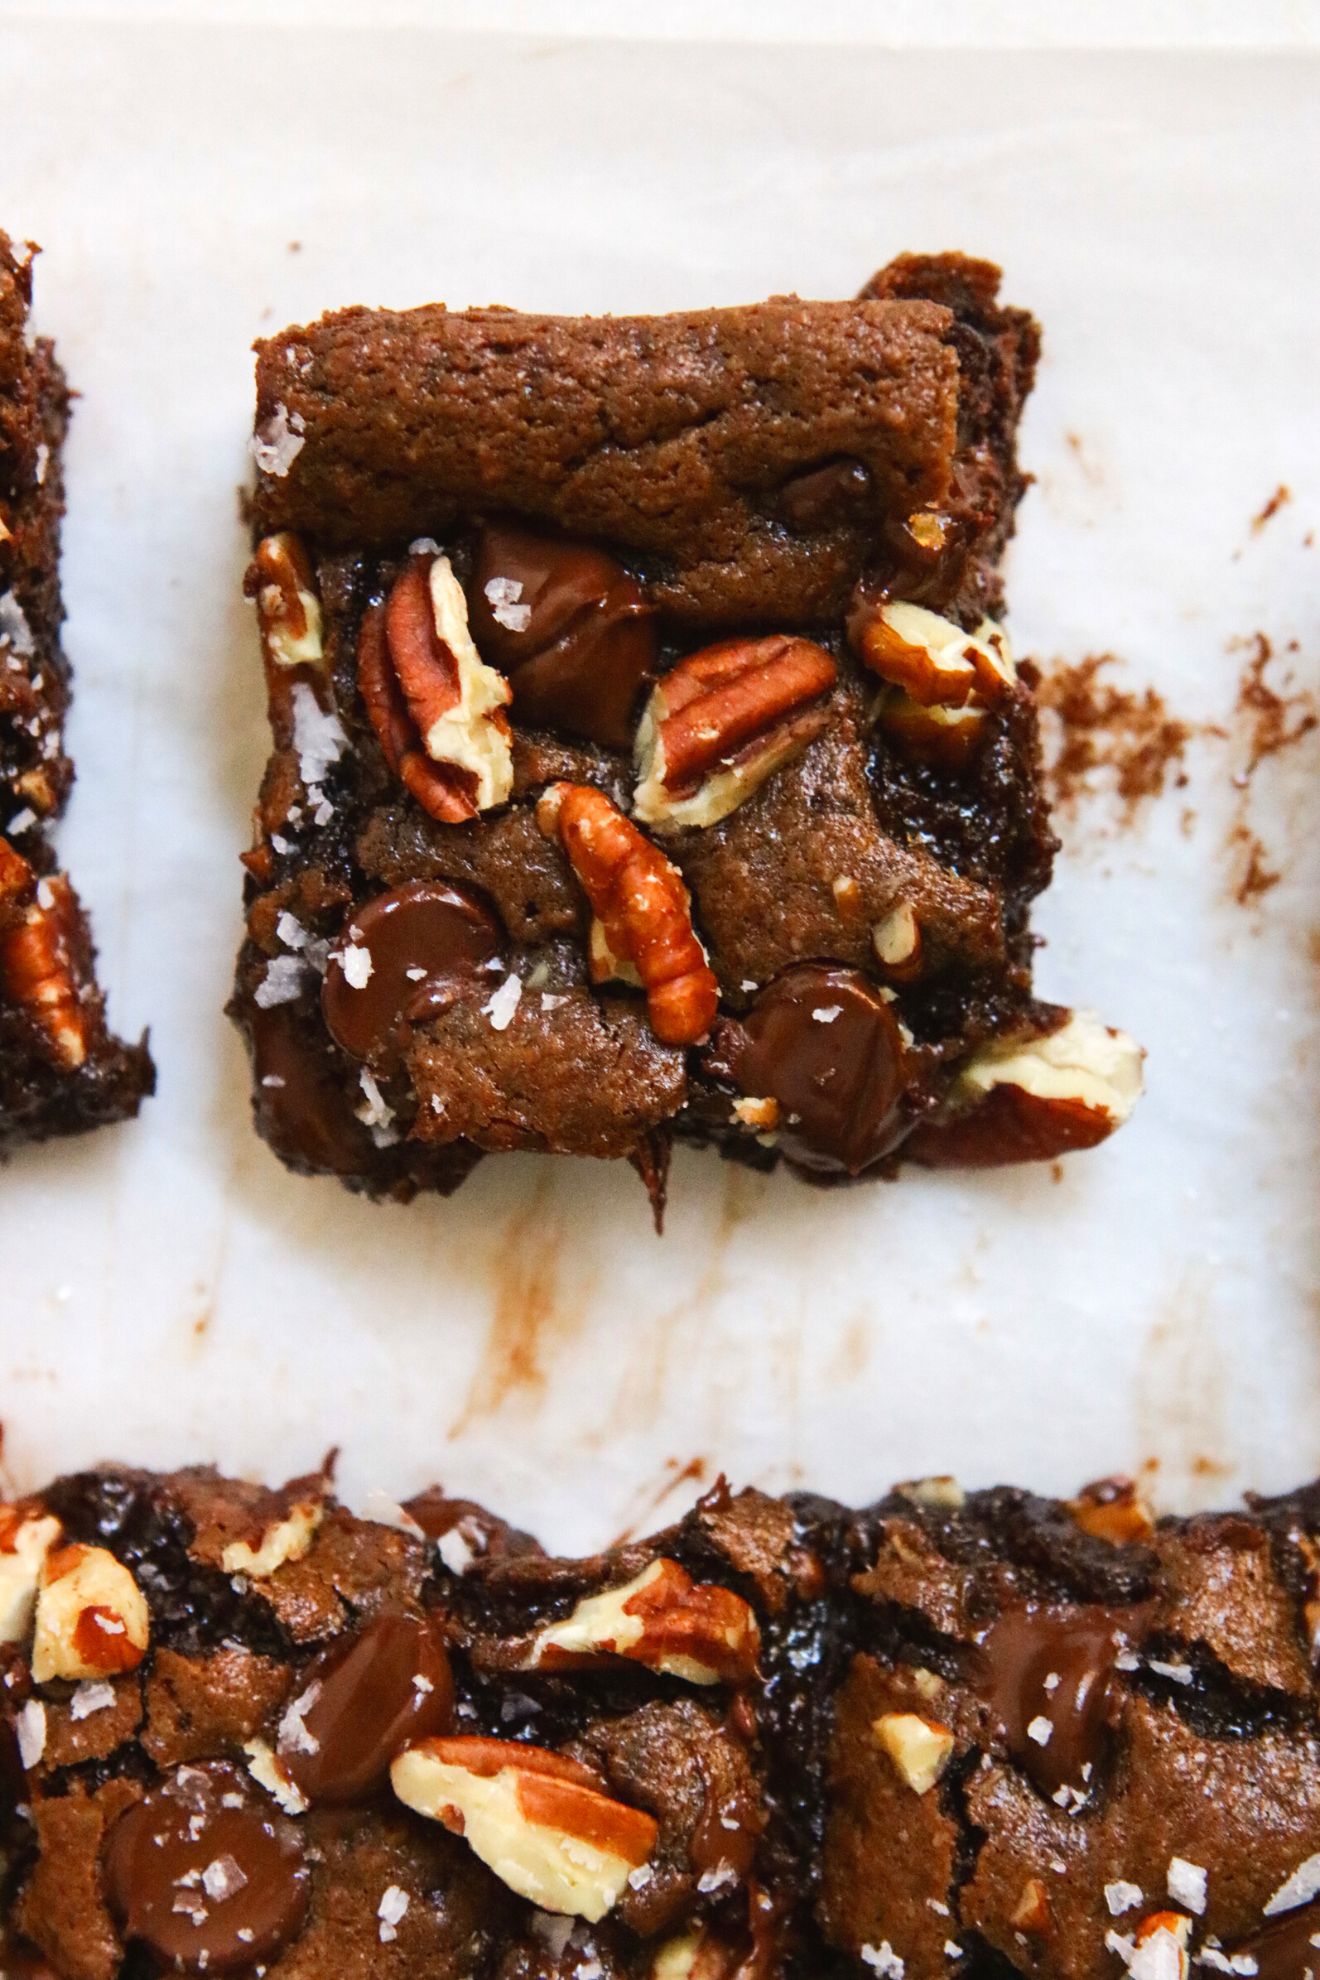 This is an overhead image of a gooey almond butter brownie topped with pecans and flakey salt. The brownie sits on a white surface with more brownies to the bottom of the image.